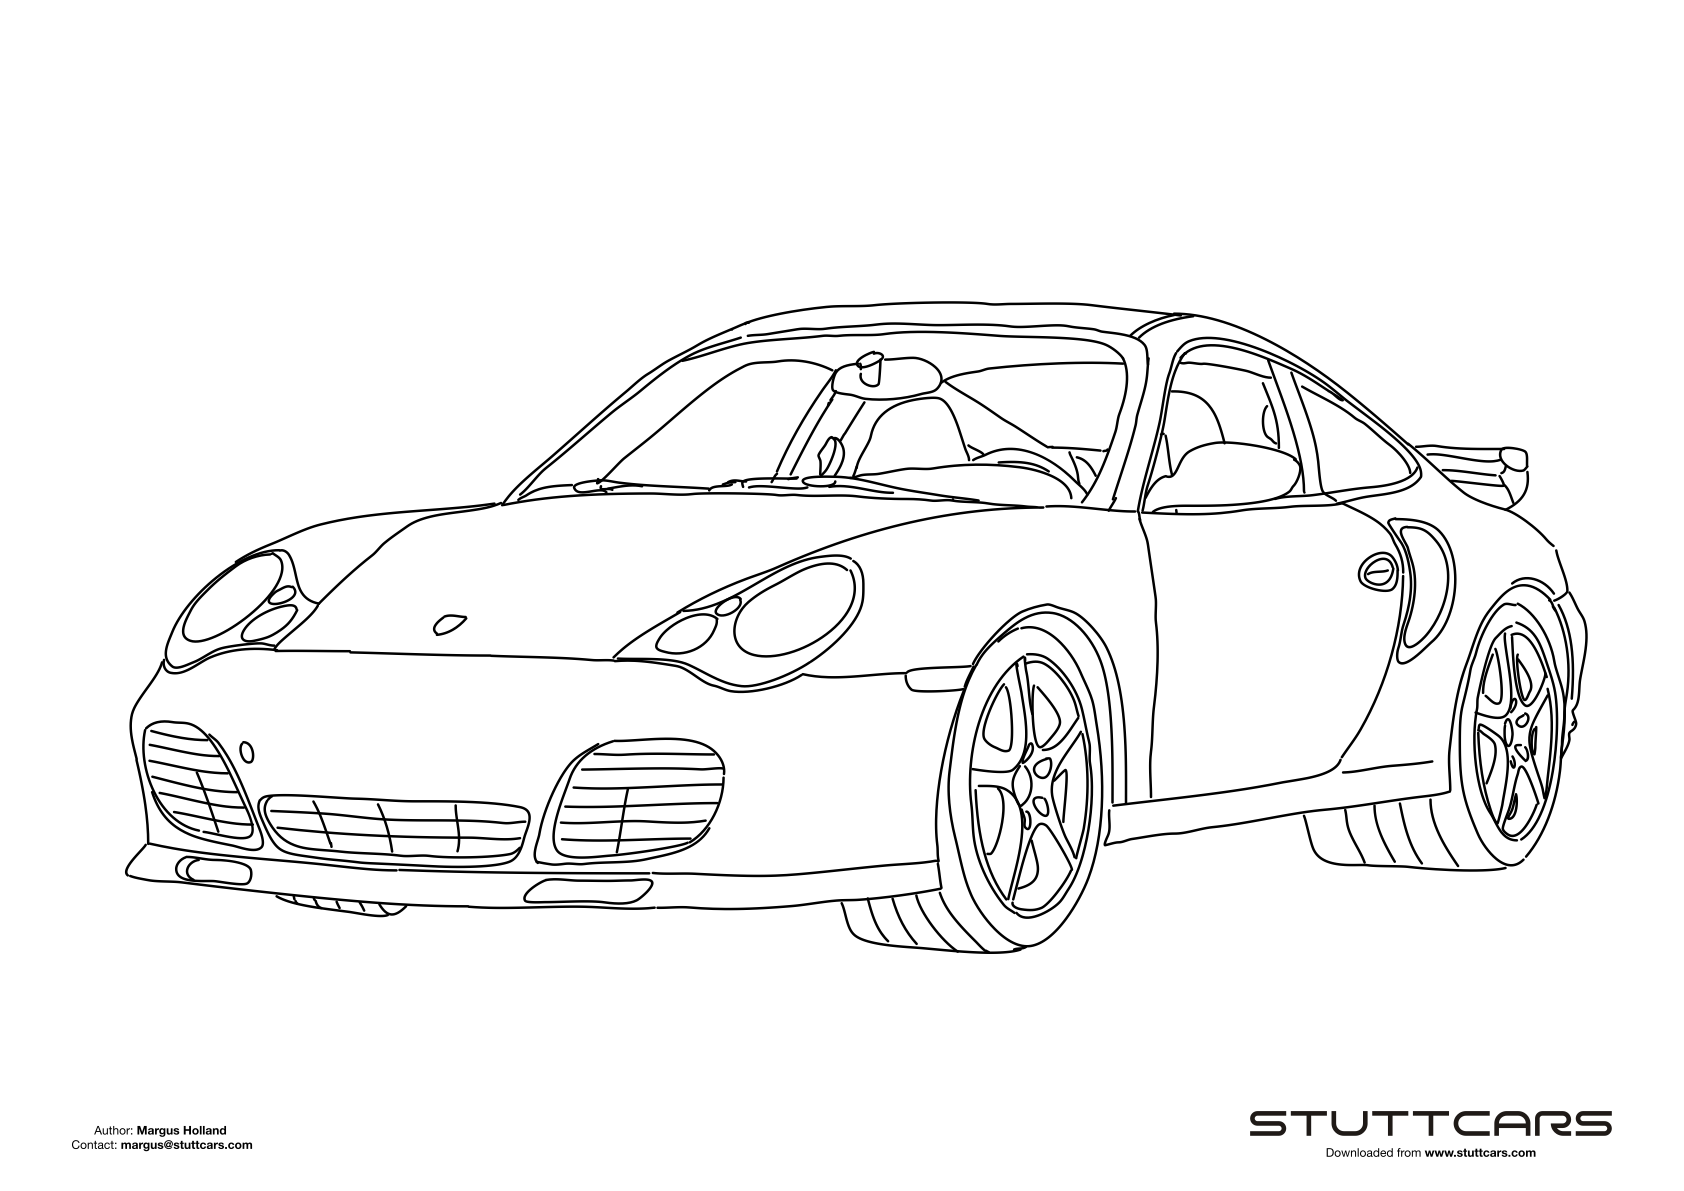 Porsche 911 (996) Turbo with XAF Aerokit Coloring Page